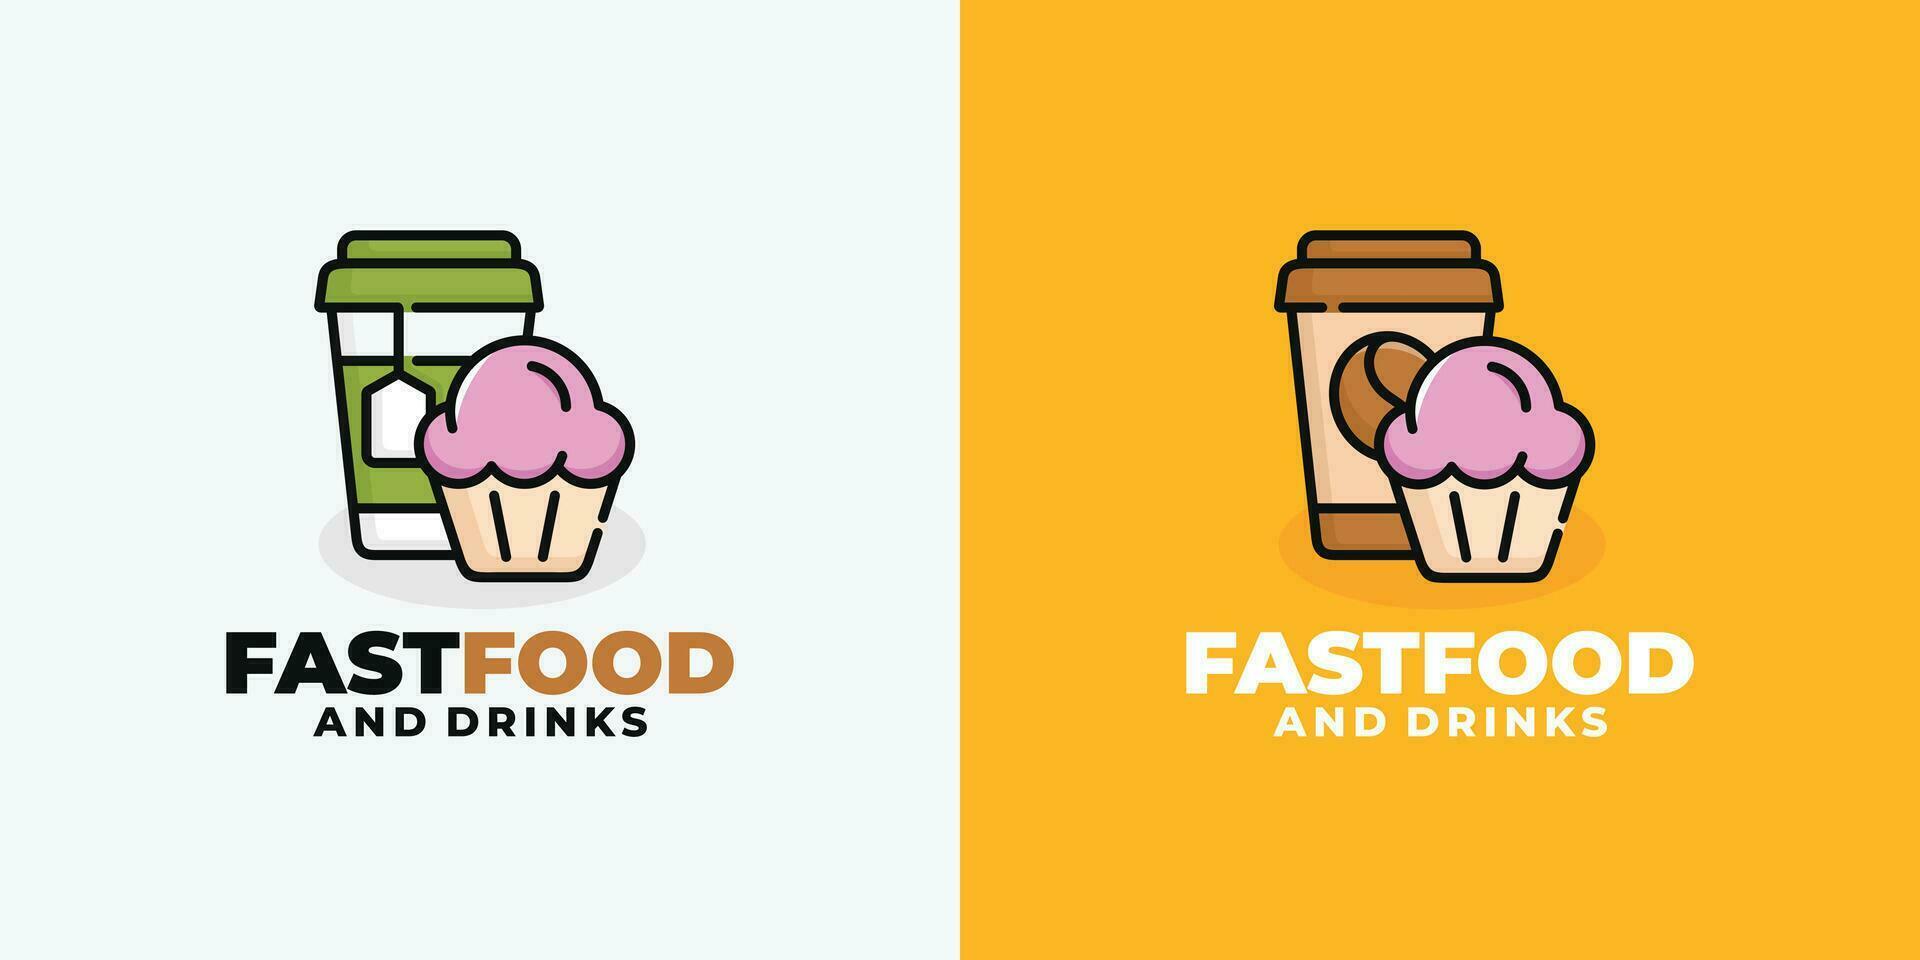 Cupcake and drink fast food logo design vector